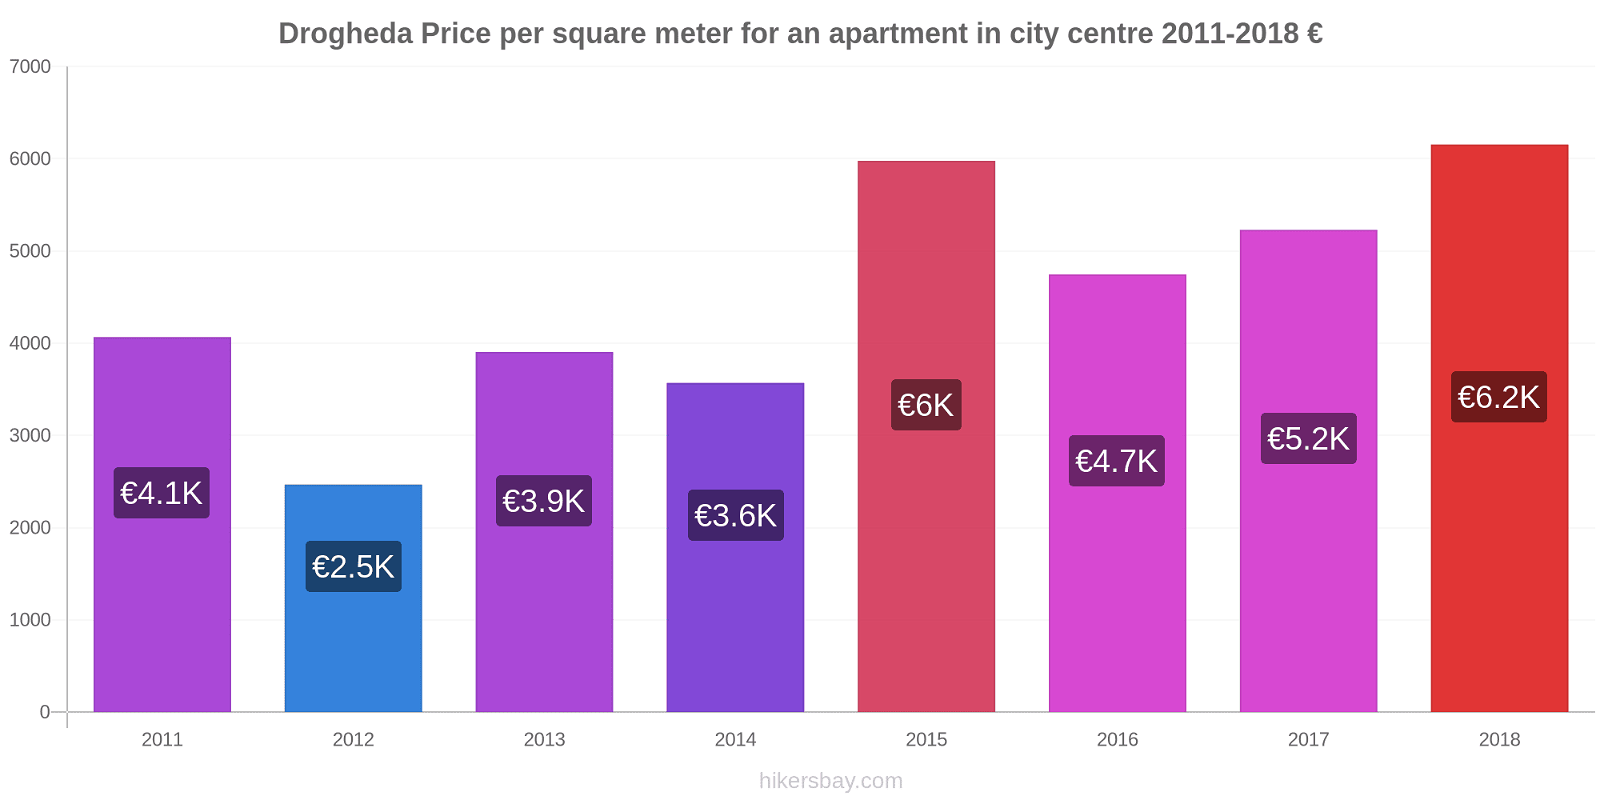 Drogheda price changes Price per square meter for an apartment in city centre hikersbay.com